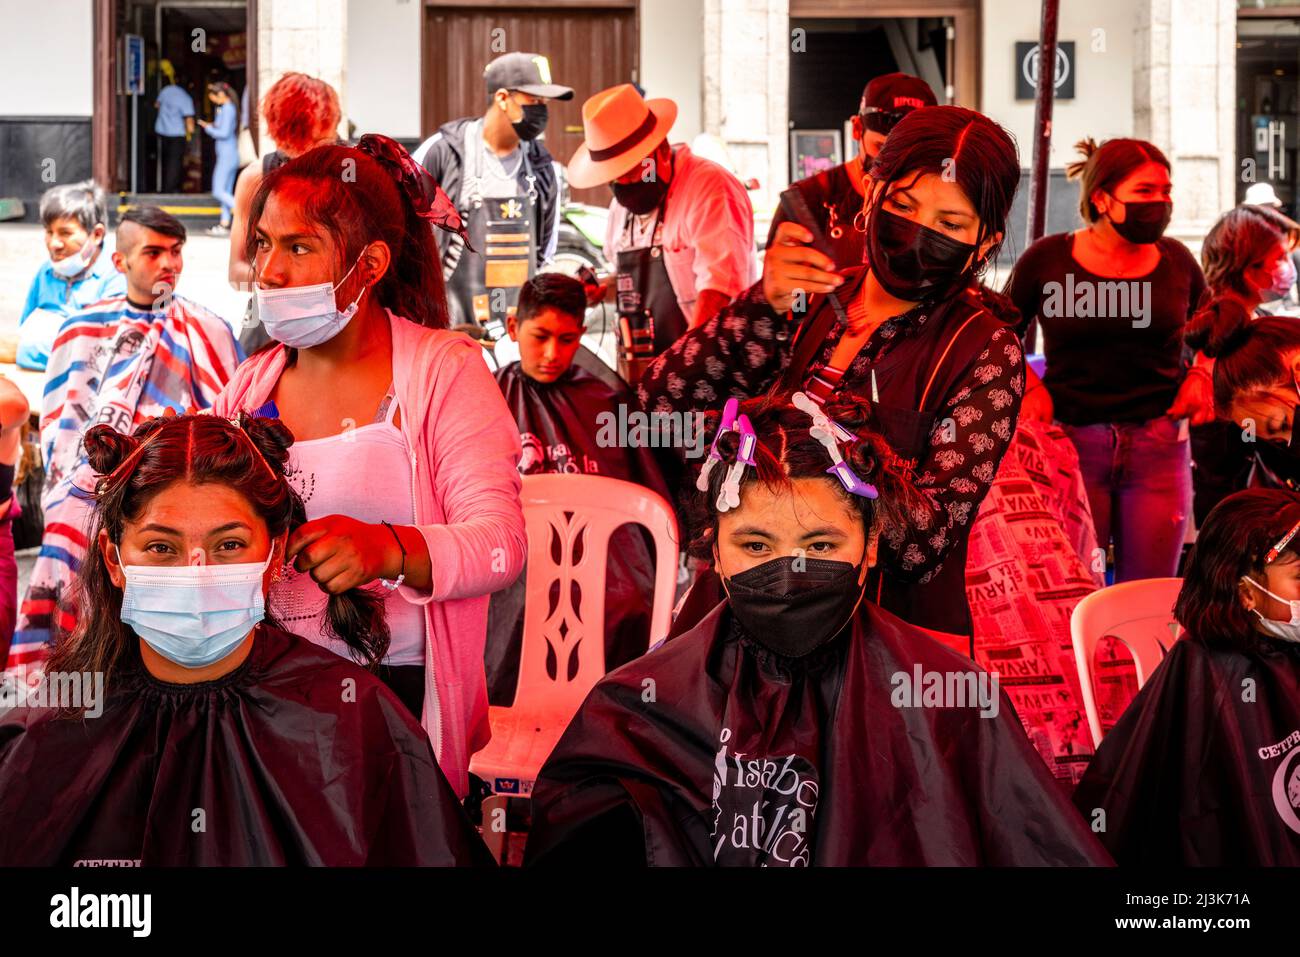 Young Peruvians having their hair cut off in Arequipa, Peru in response to a Social Media request for hair to soak up oil from the Callao oil spill. Stock Photo